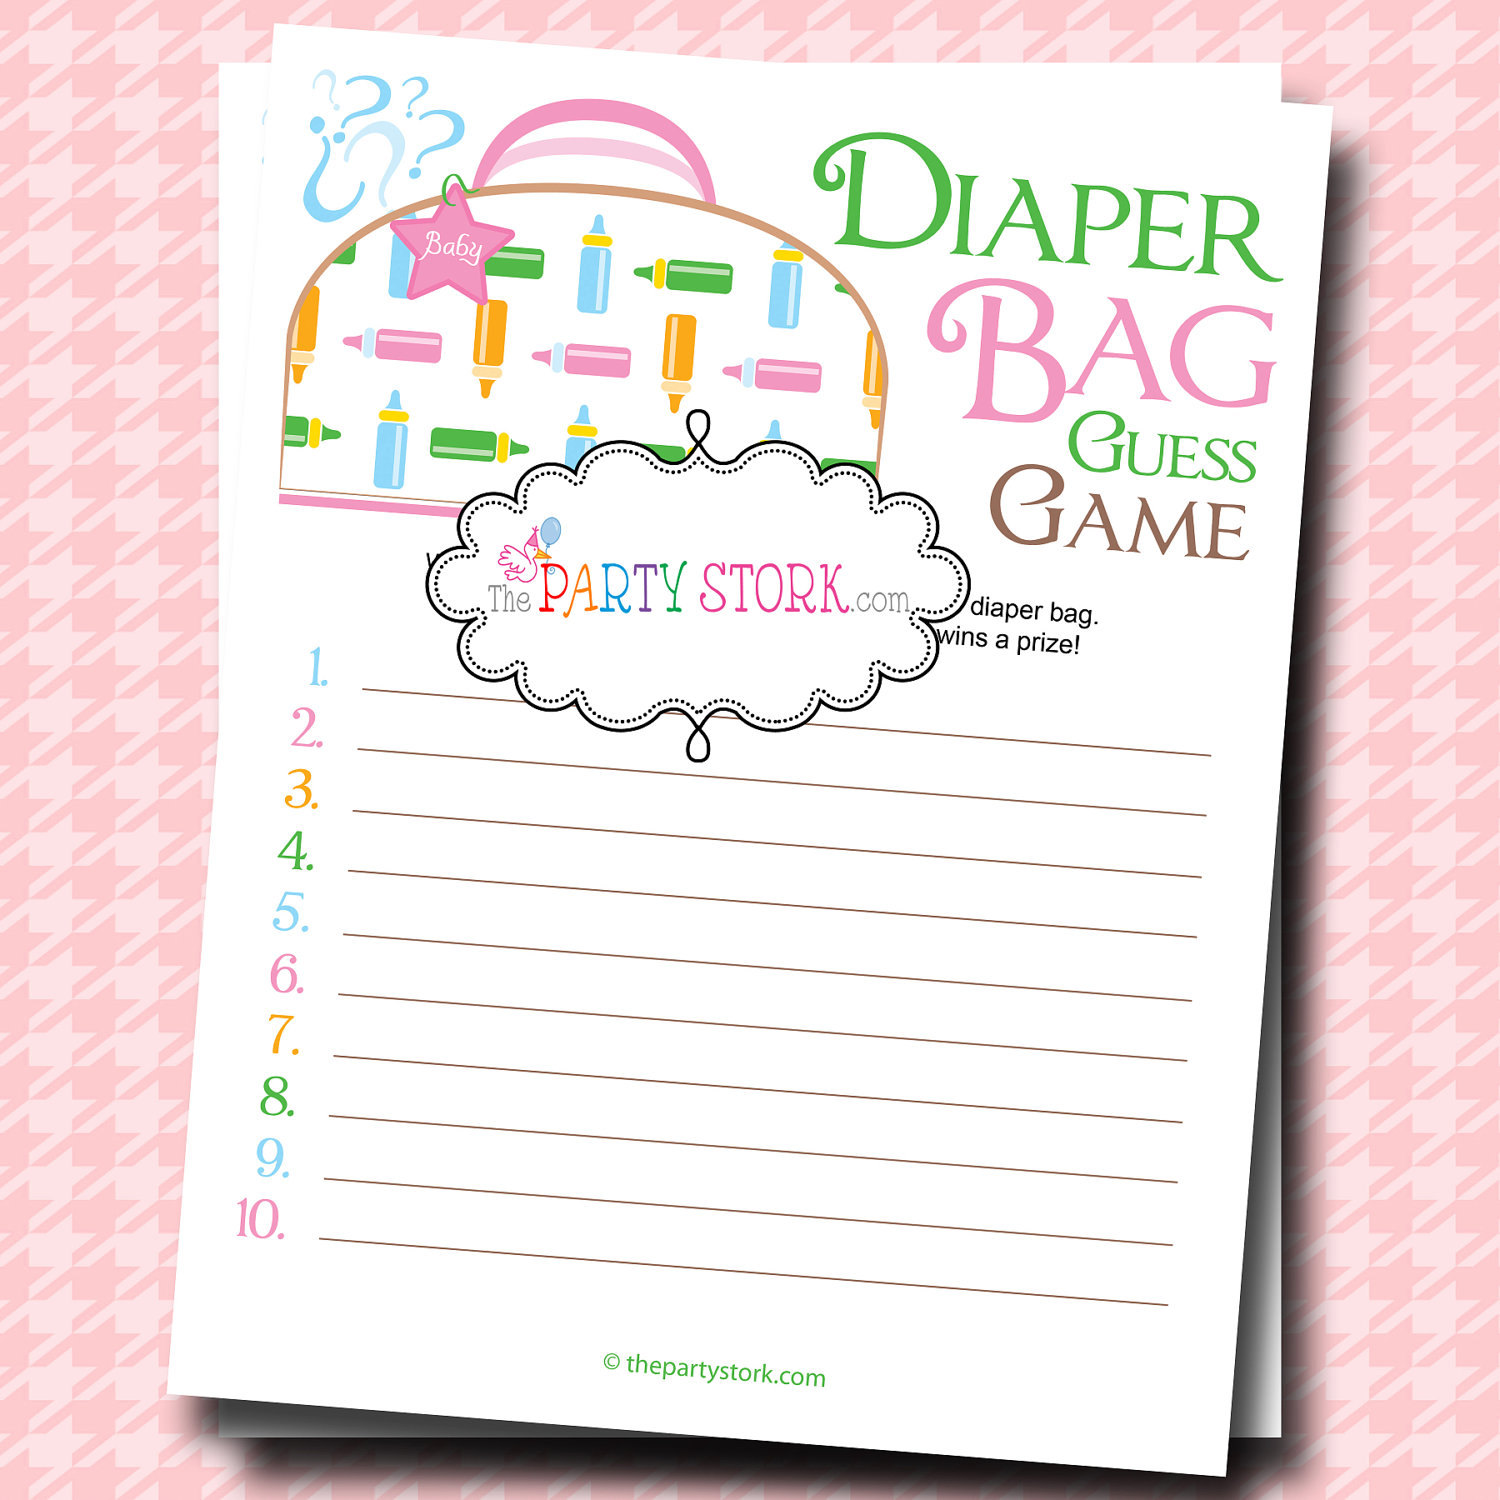 Baby Shower Games Unique Diaper Bag Guess Game by thepartystork